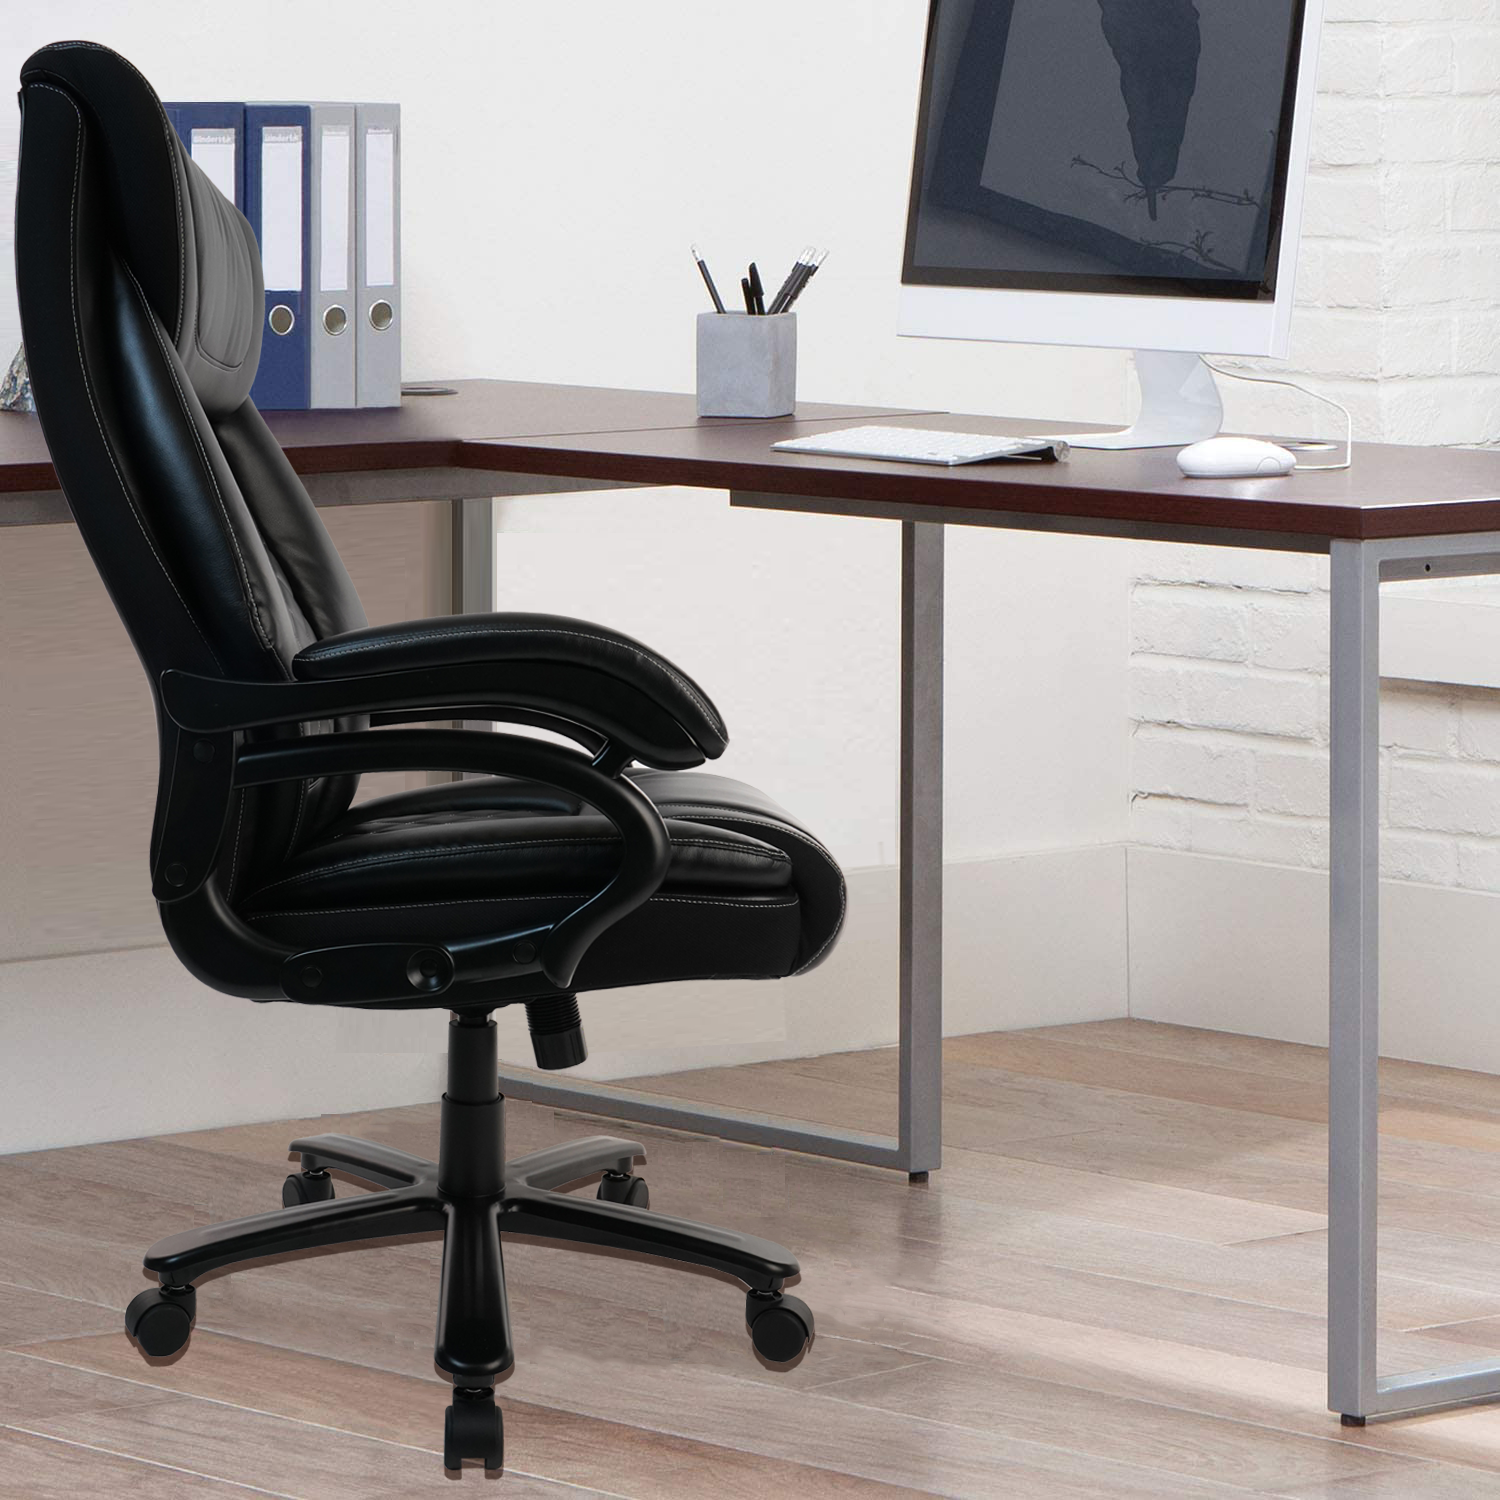 Big and Tall Mesh Office Chair 400lbs - Ergonomic Executive Desk Chair,  Heavy Duty Computer Chair-Wide Thick Seat Cushion, Metal Base, Adjustable